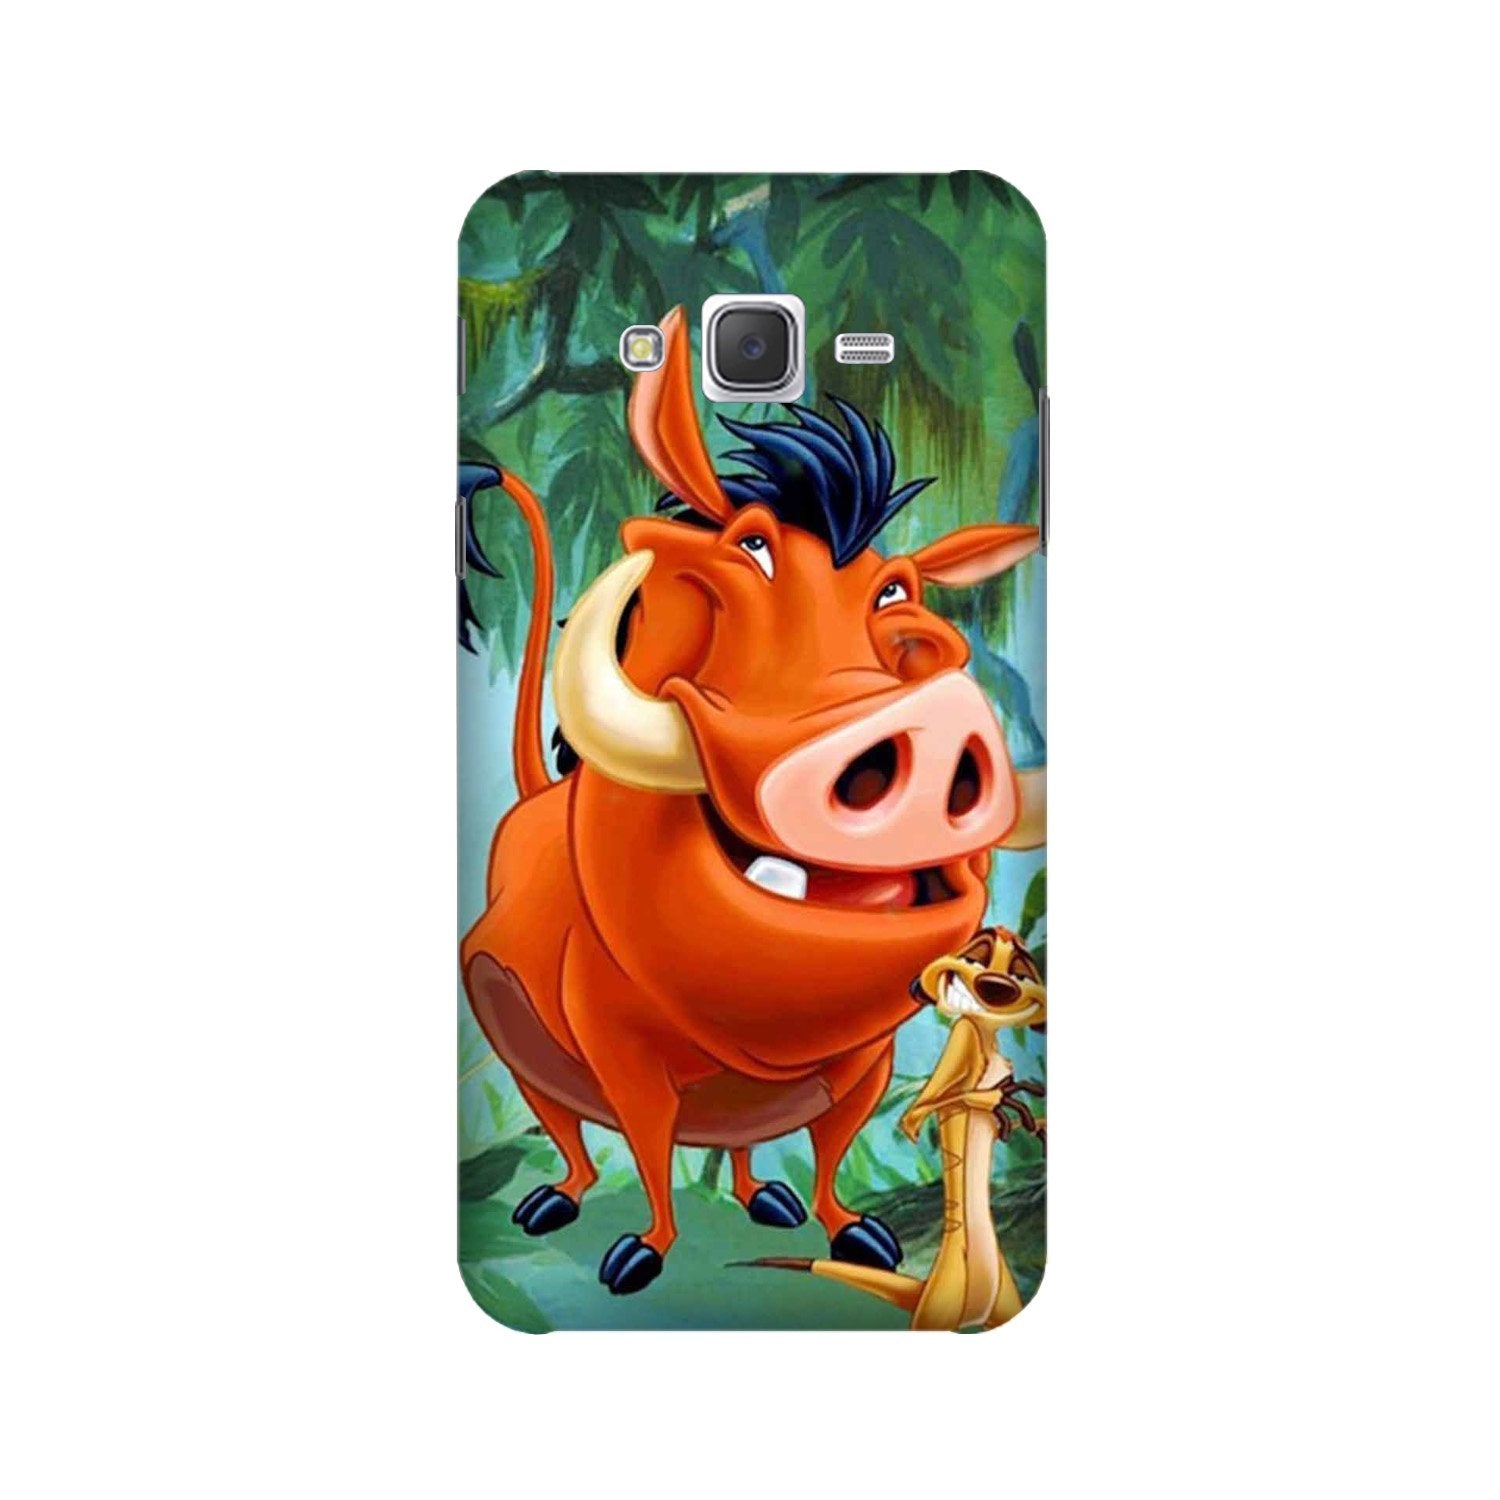 Timon and Pumbaa Mobile Back Case for Galaxy J7 Nxt   (Design - 305)